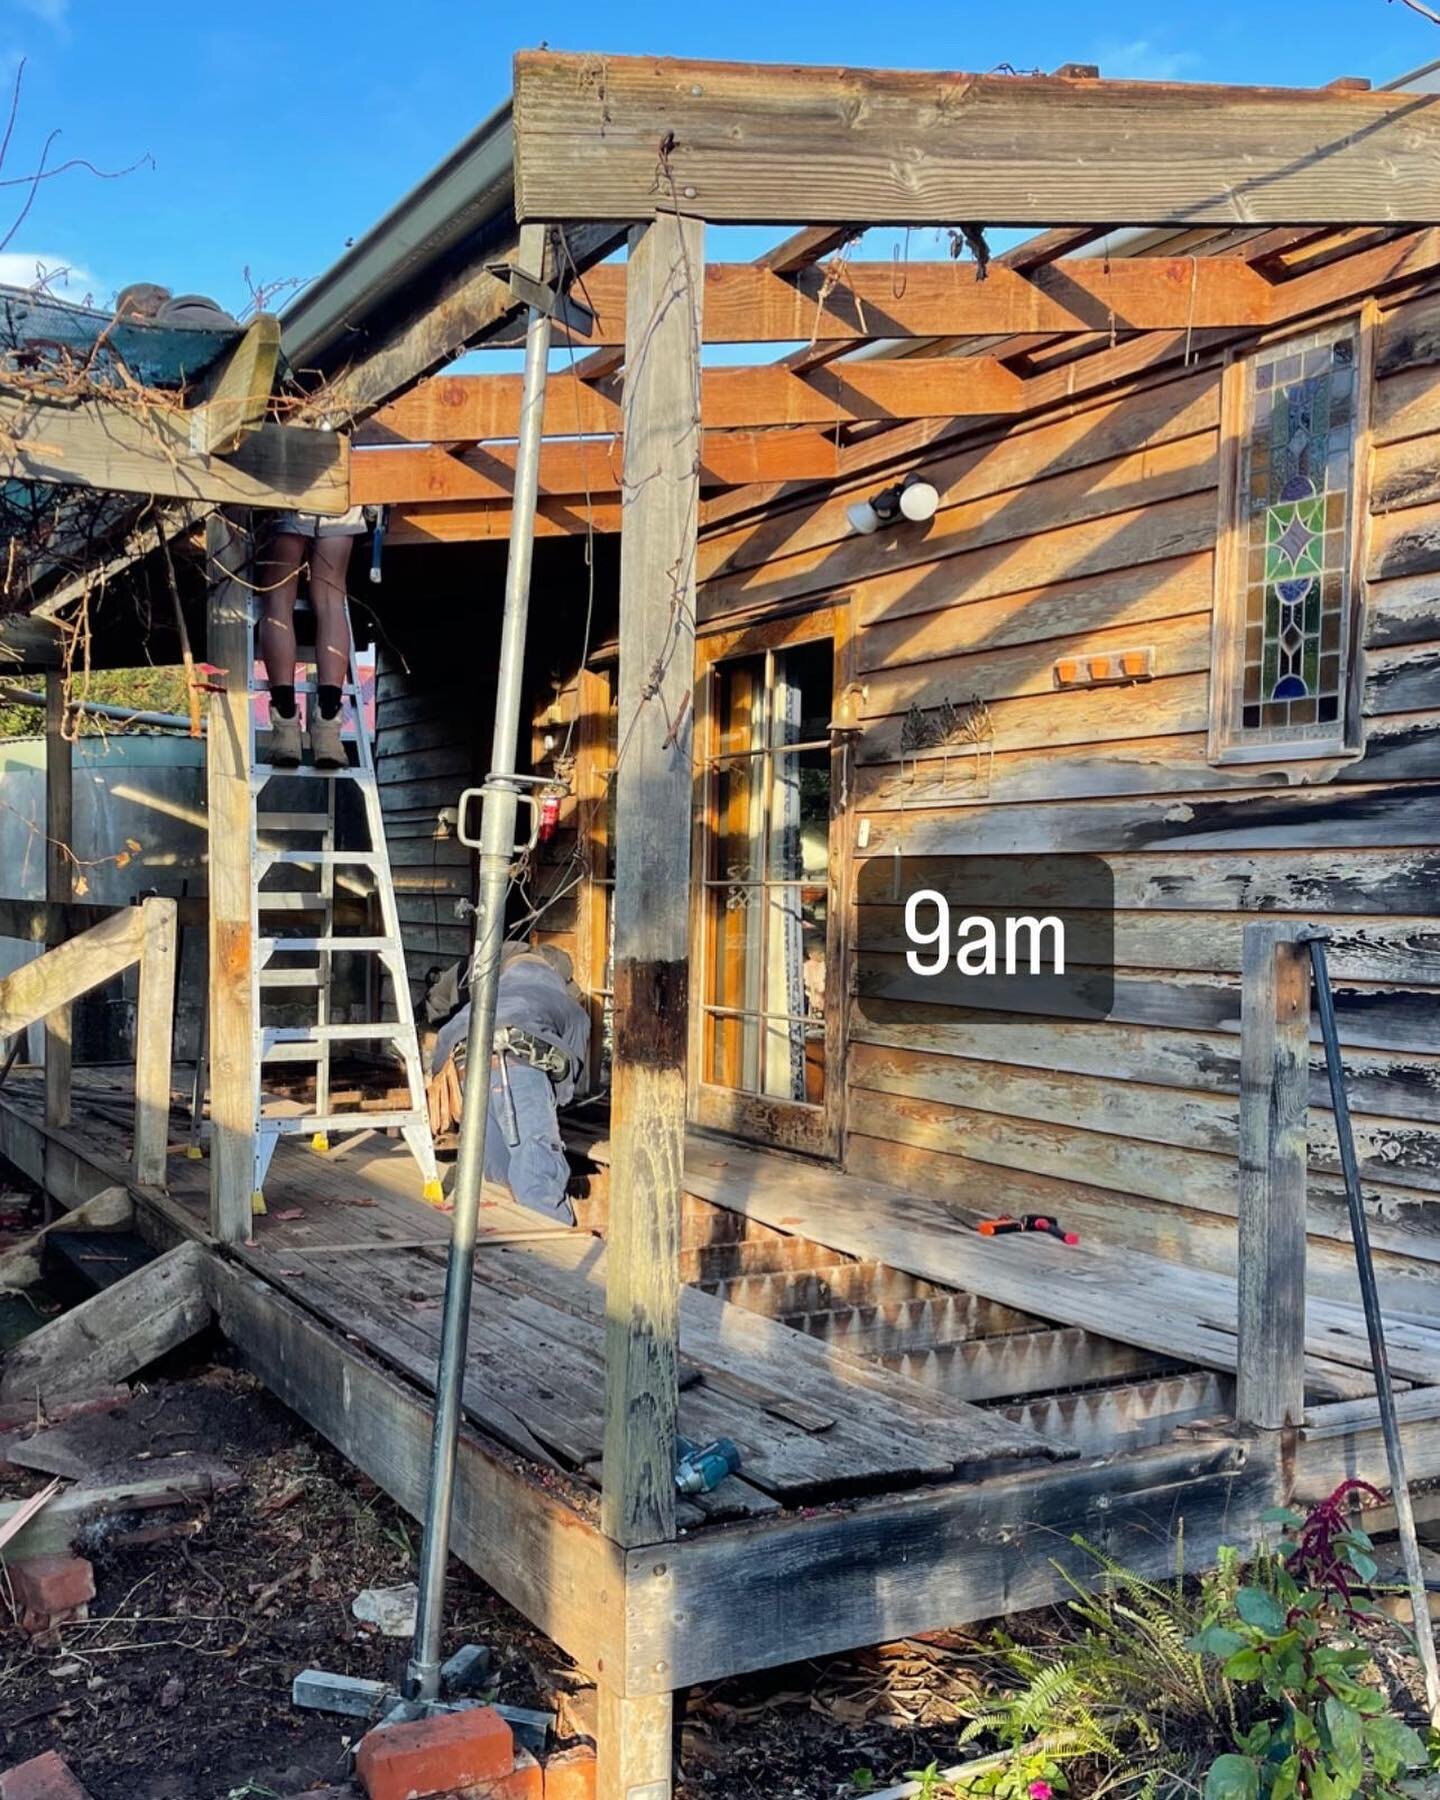 Solid effort by the boys Friday! 
- reinstate old verandah including new polycarbonate sheeting
- demolish old deck and replace with hardwood decking including all new subfloor
- 5.5m x 1.2m ramp attached to side 
- add balustrade to surrounding 
- c